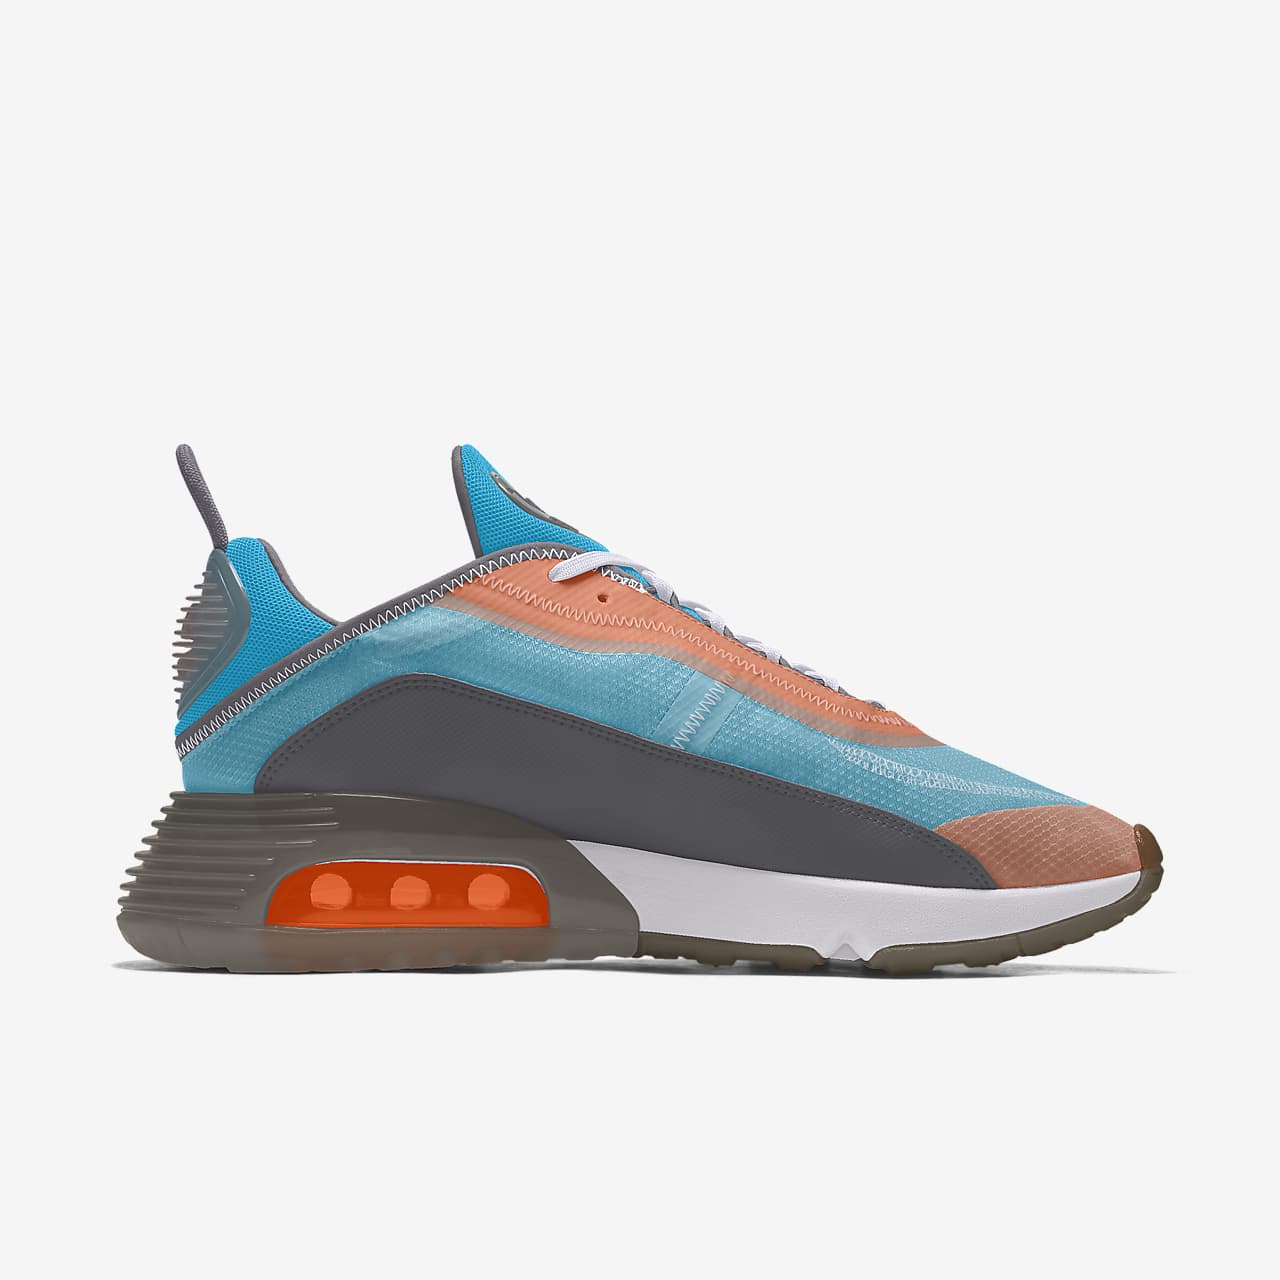 air max 9 design your own